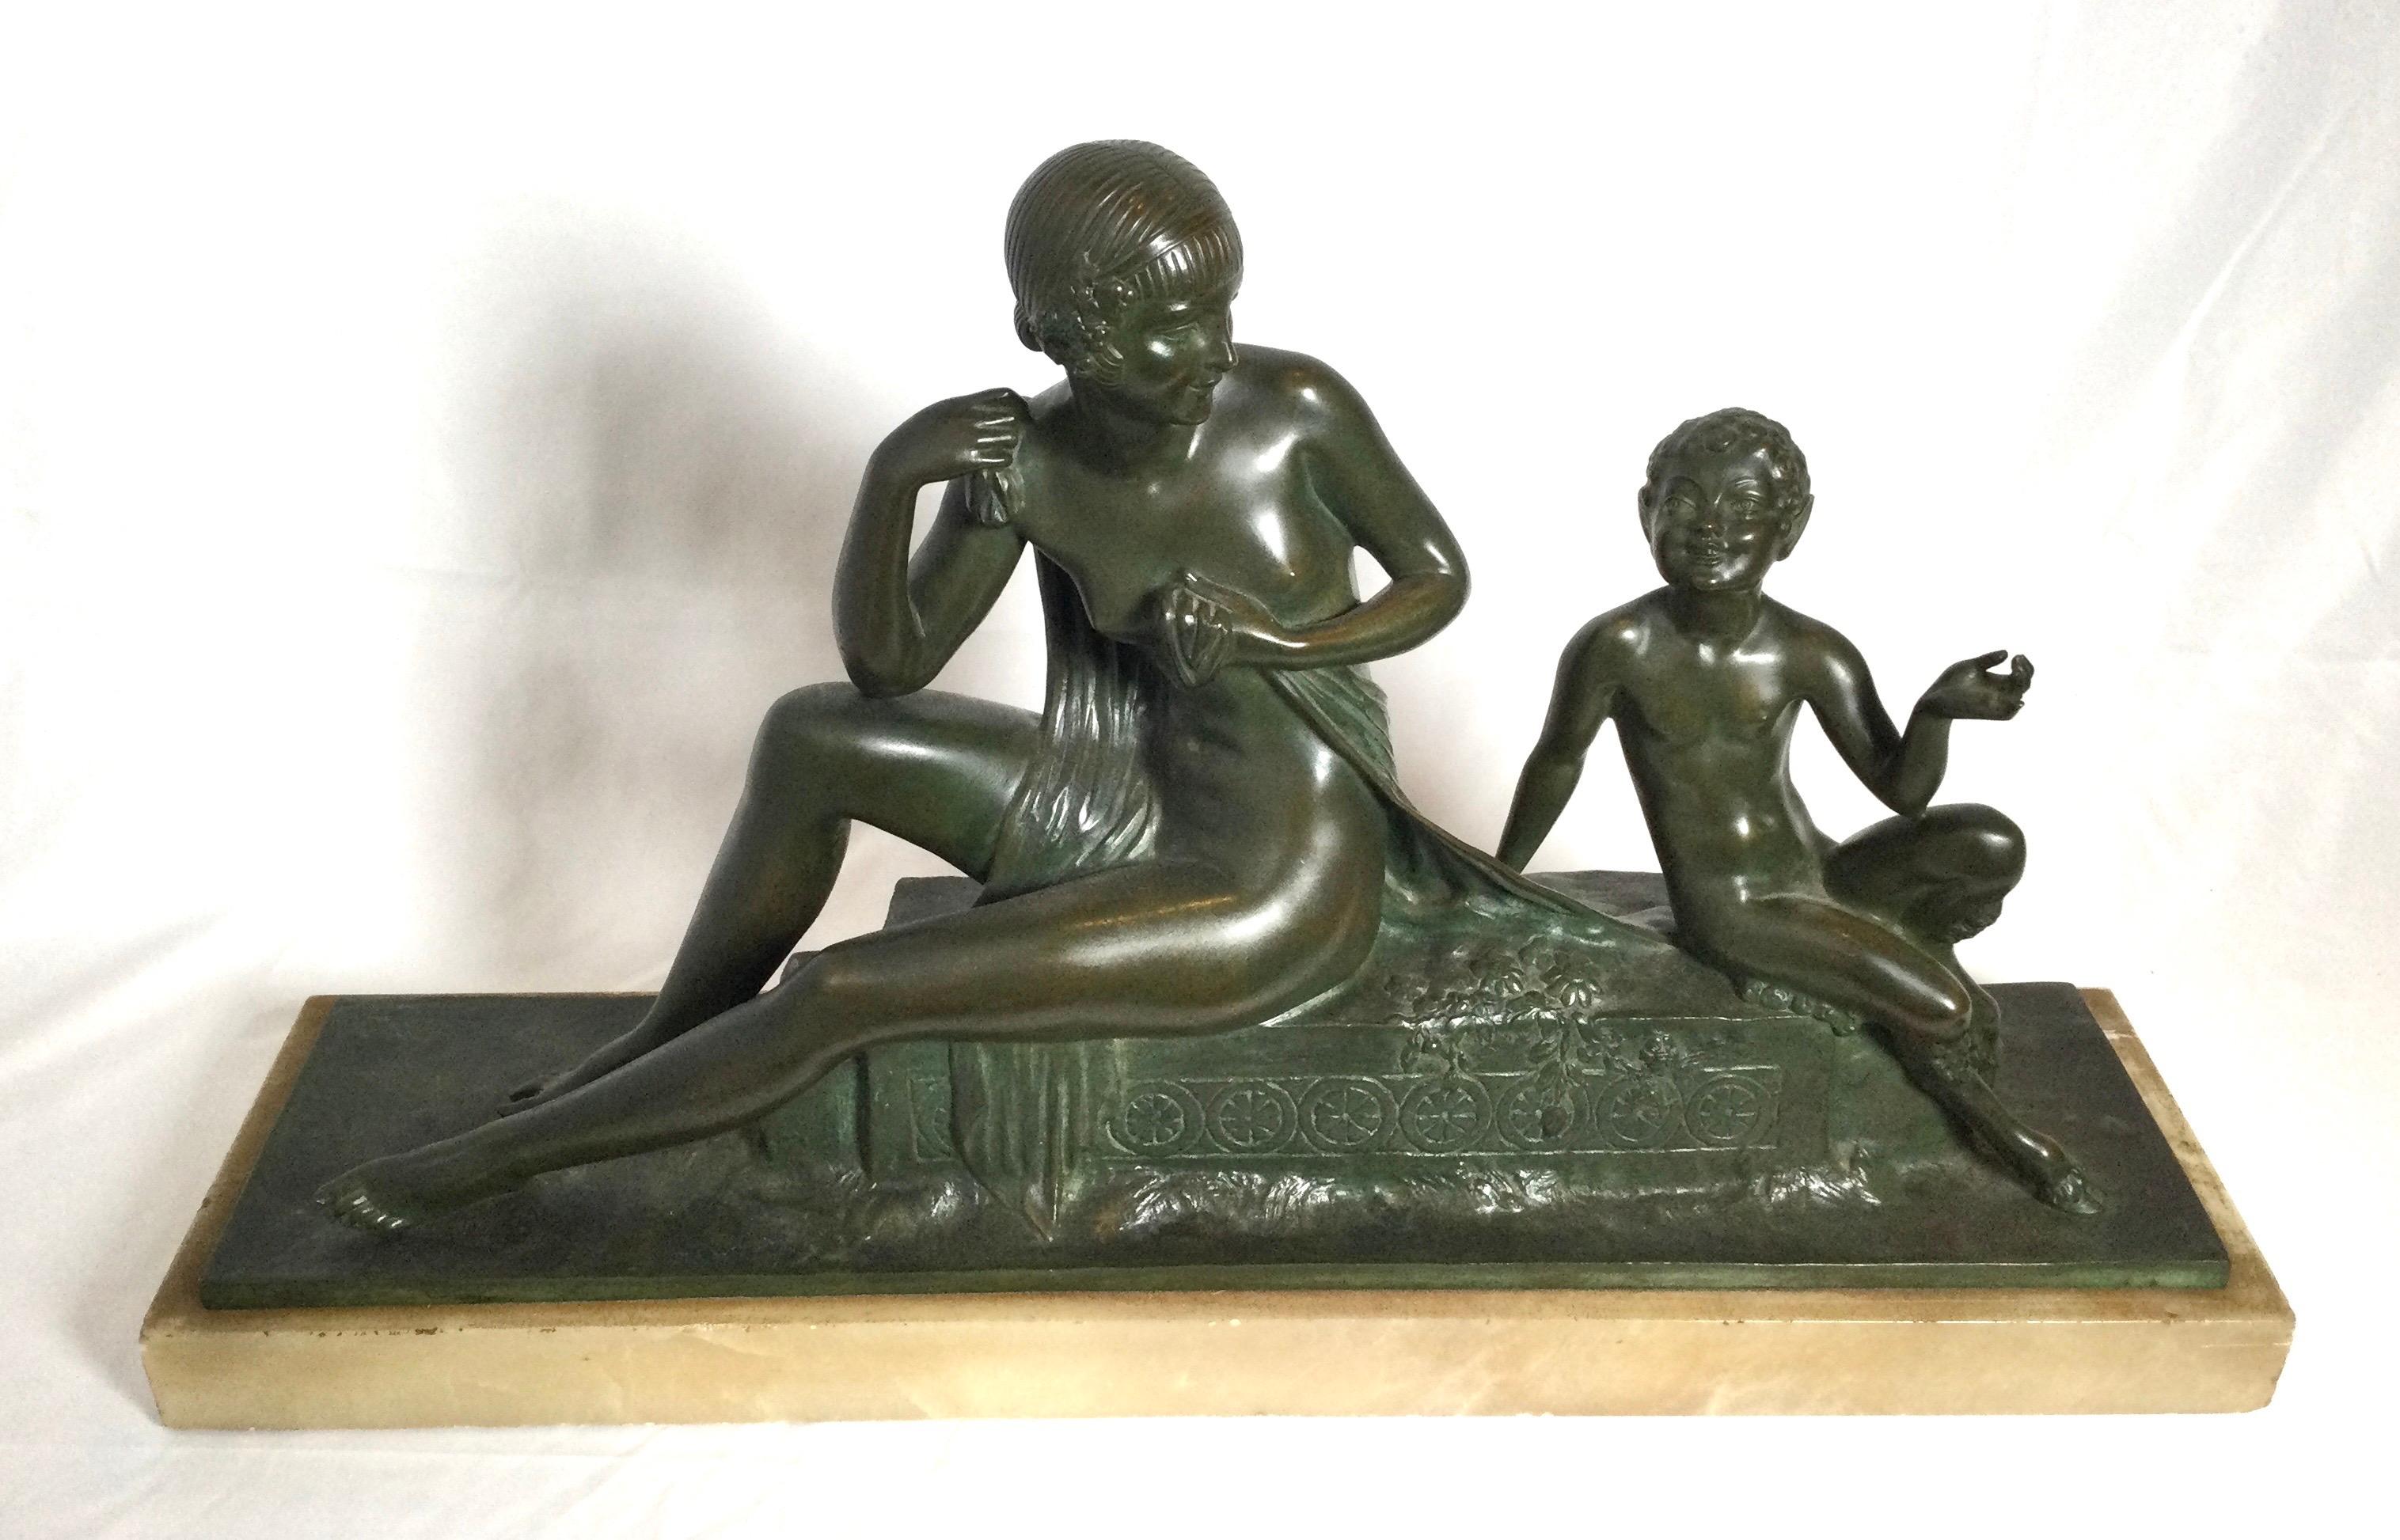 A beautiful patinated bronze of bacchante with pan by artist Joseph Descomp, France, 1920. The bronze in a green patination with an Art Deco style.